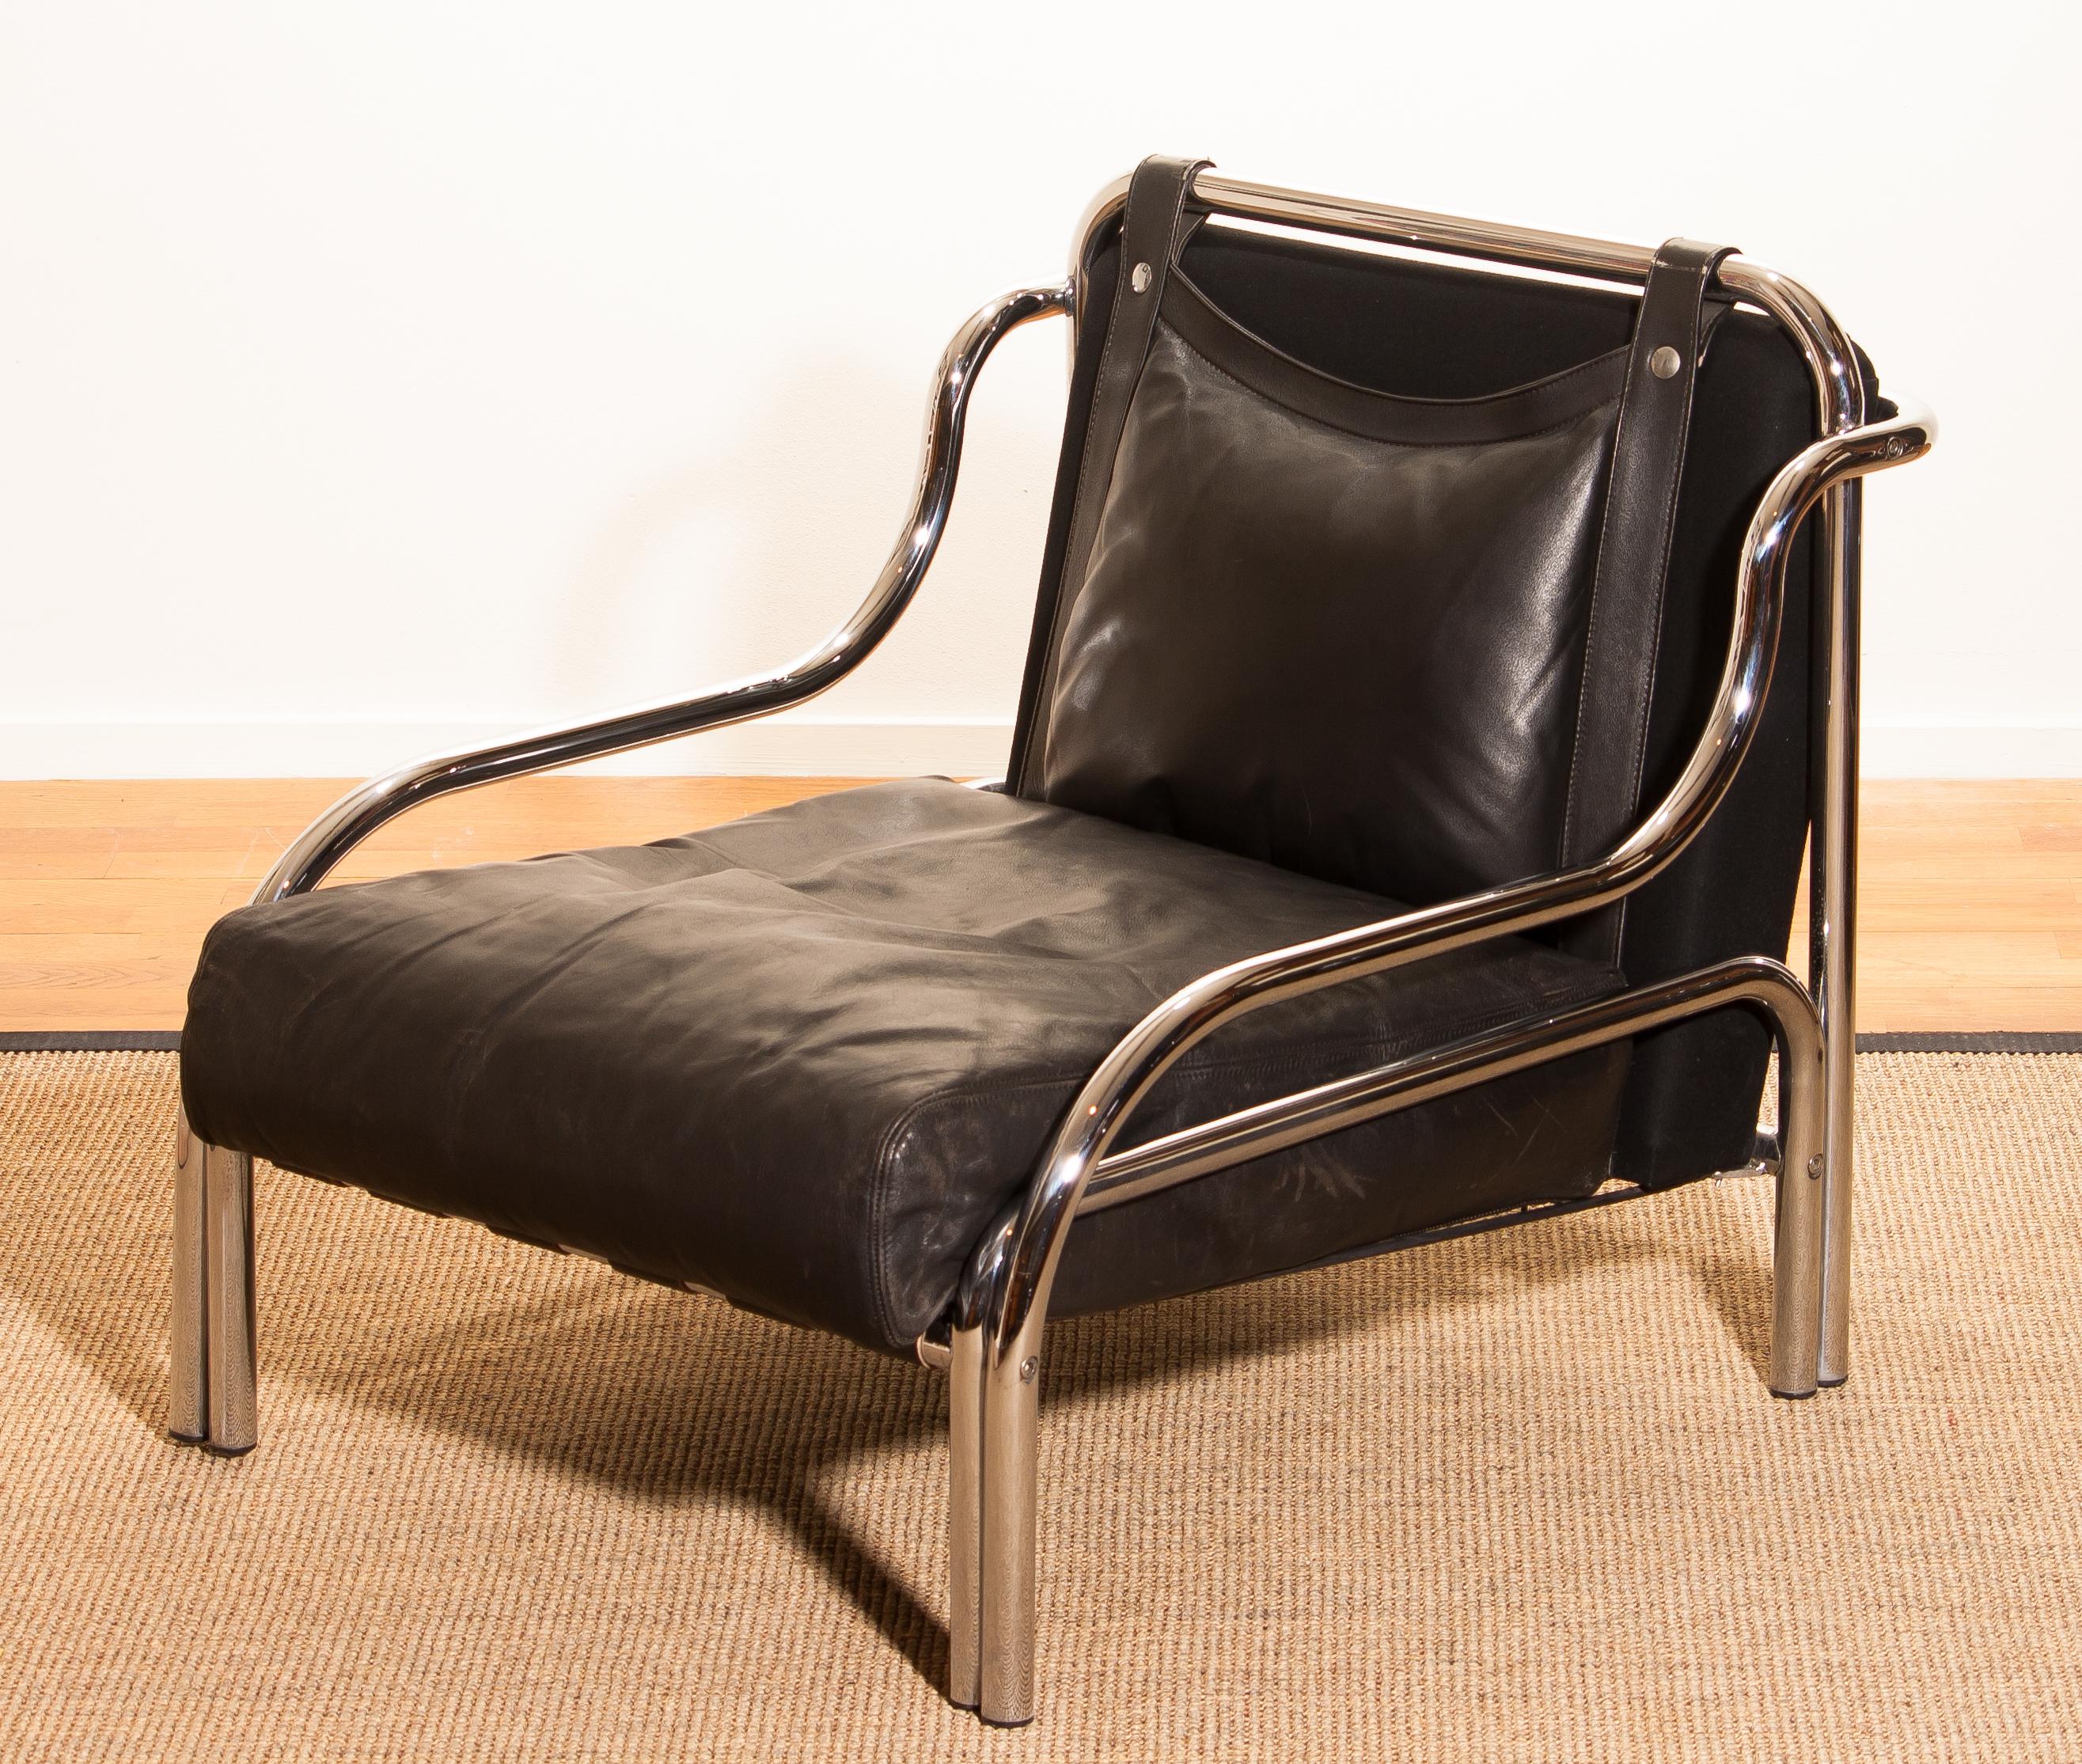 1960s, Leather and Chrome Lounge Chair by Gae Aulenti for Poltronova 5